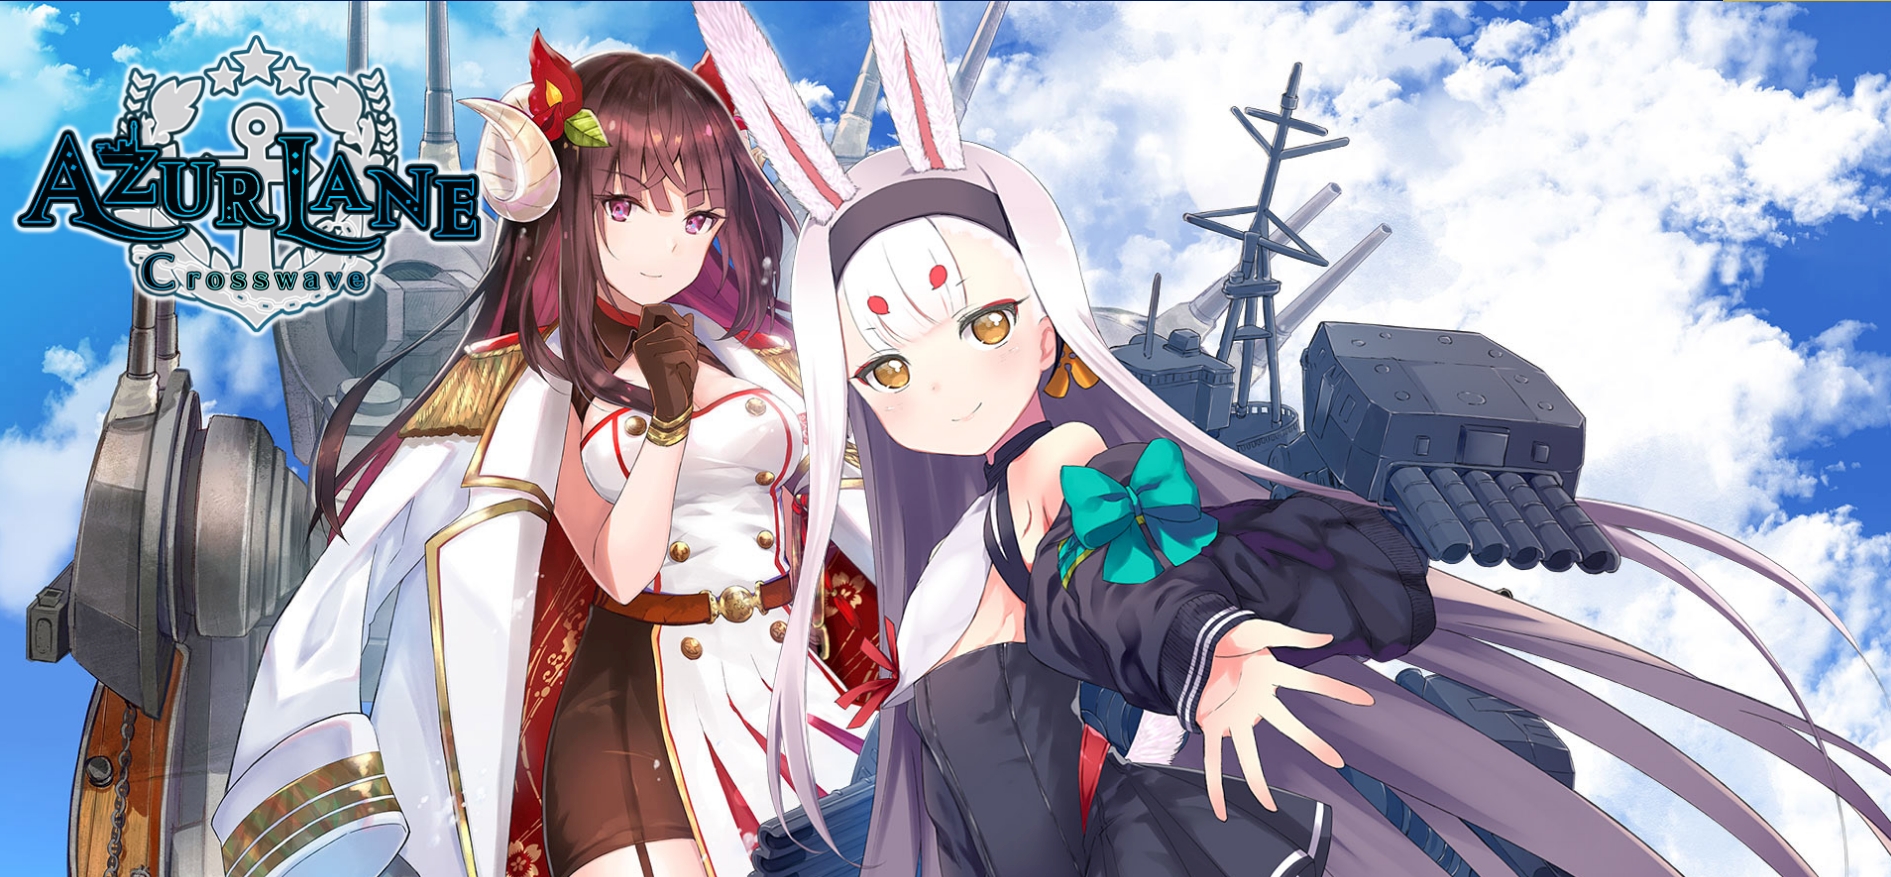 Azur Lane: Crosswave Launches In North American For The Nintendo Switch In February 2021